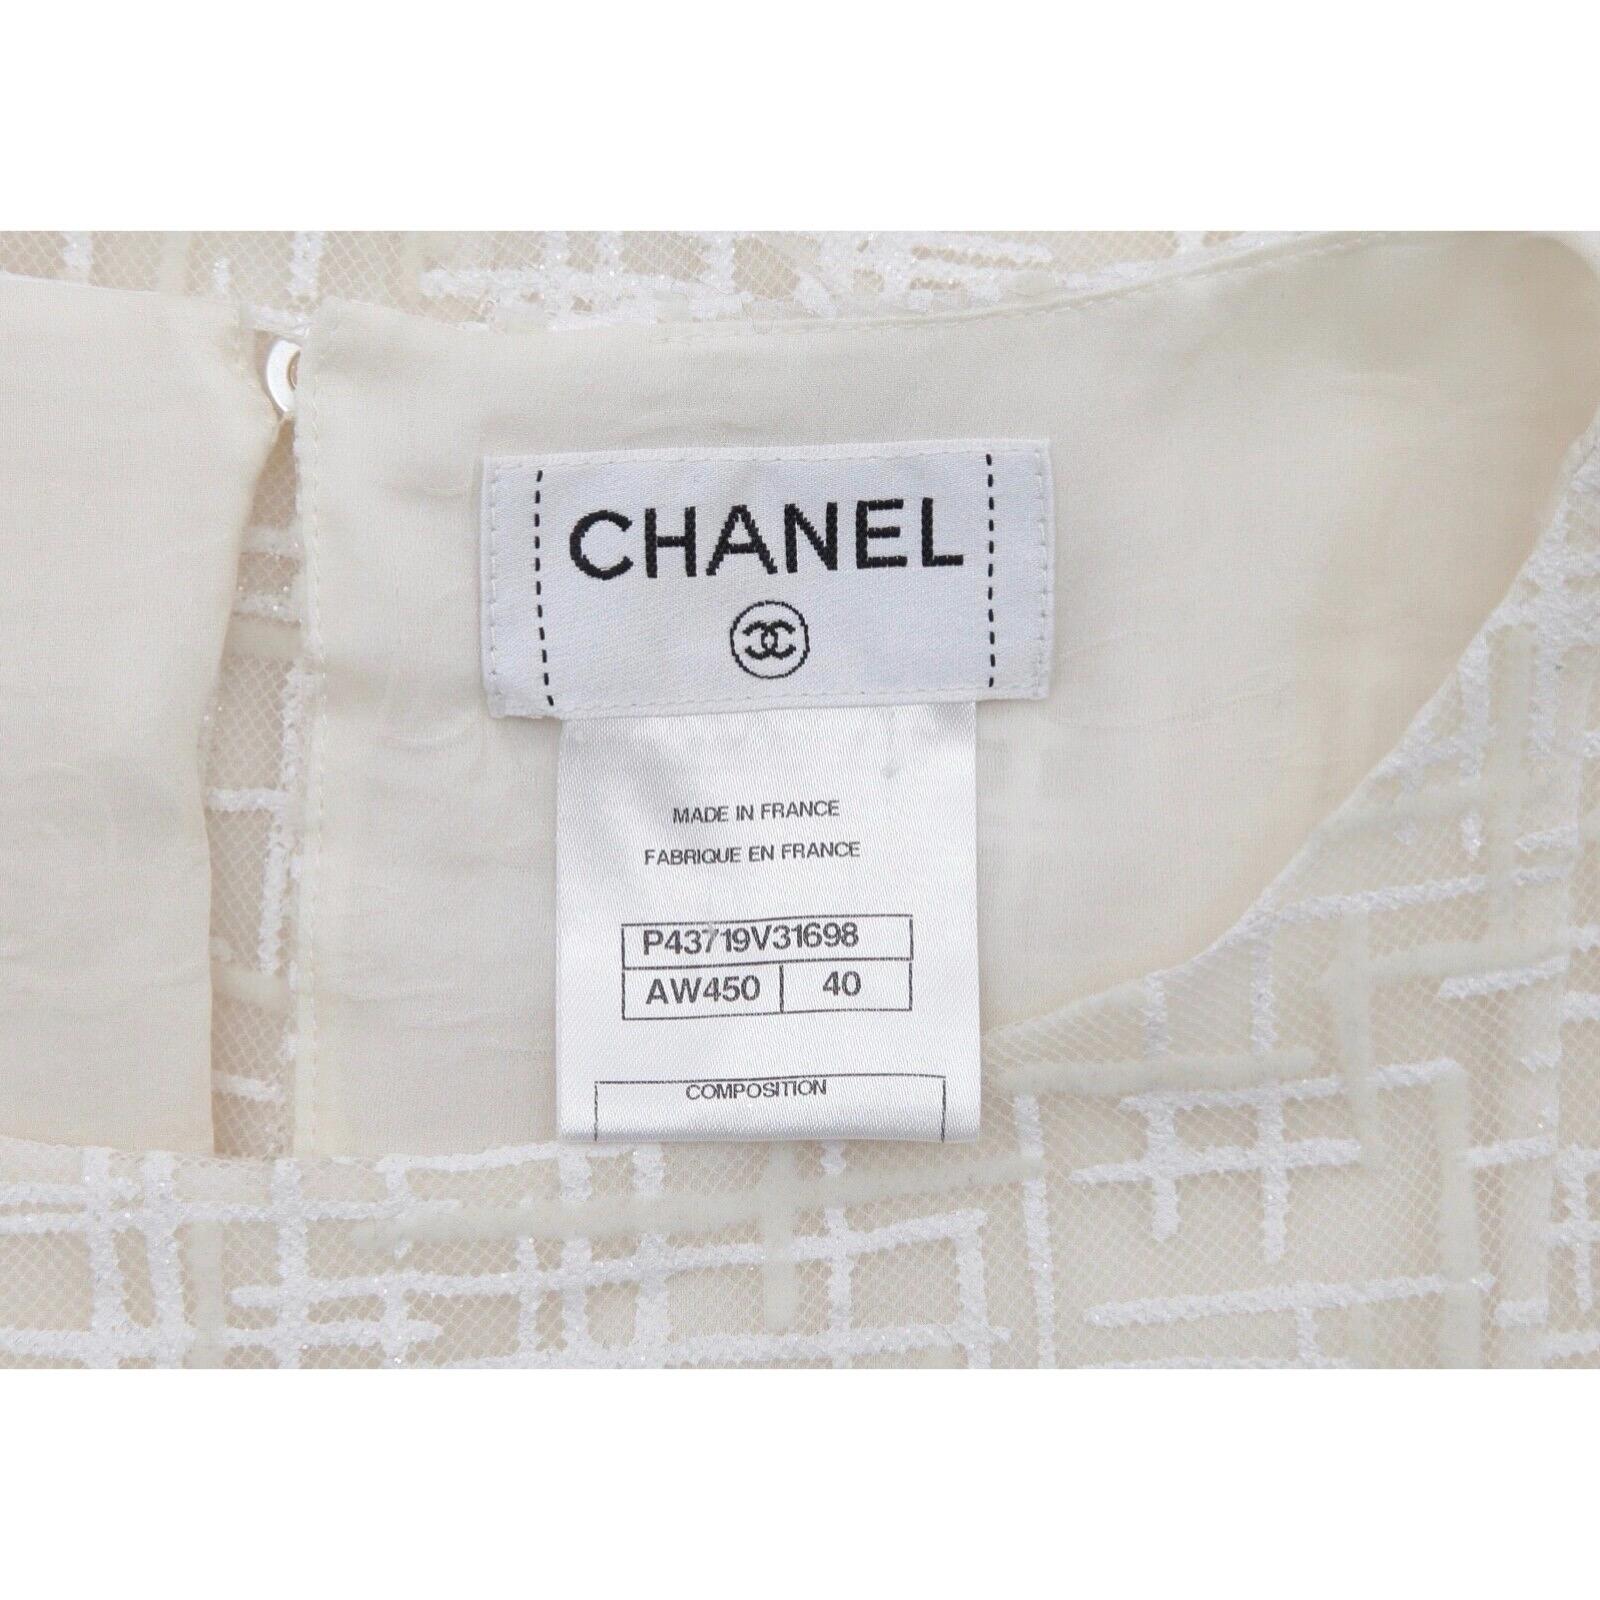 CHANEL Blouse Top Shirt Ivory Sleeveless CC Faux Pearl Button Sz 40 2012 For Sale 2